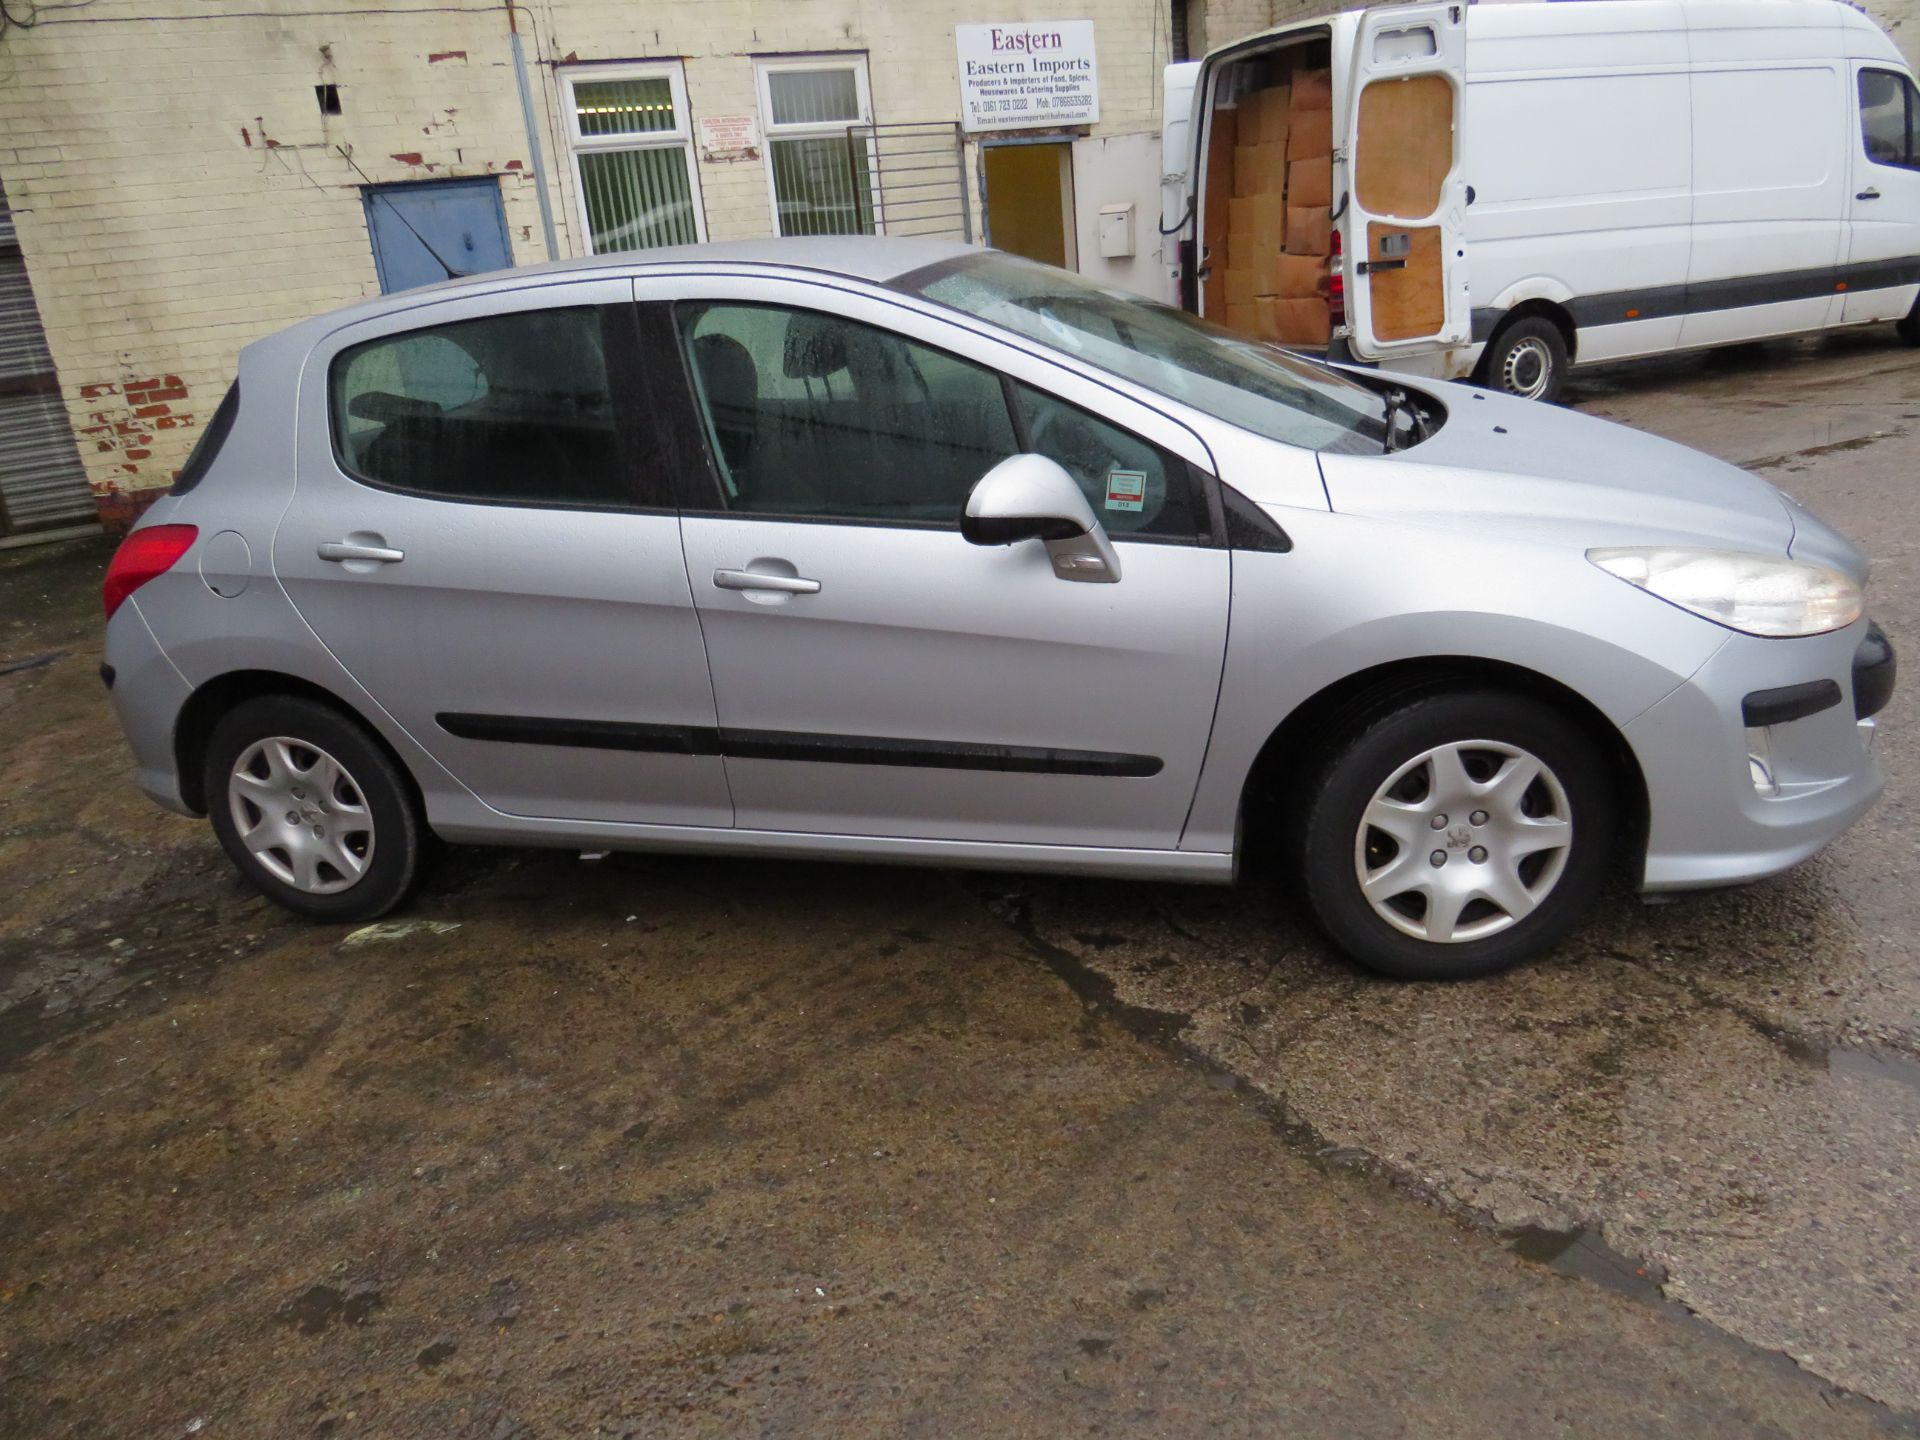 59 Plate Peugeot 308S 1.4 VTi, 60,554 miles (unchecked), MOT until Feb 2023, comes with V5 and - Image 2 of 12